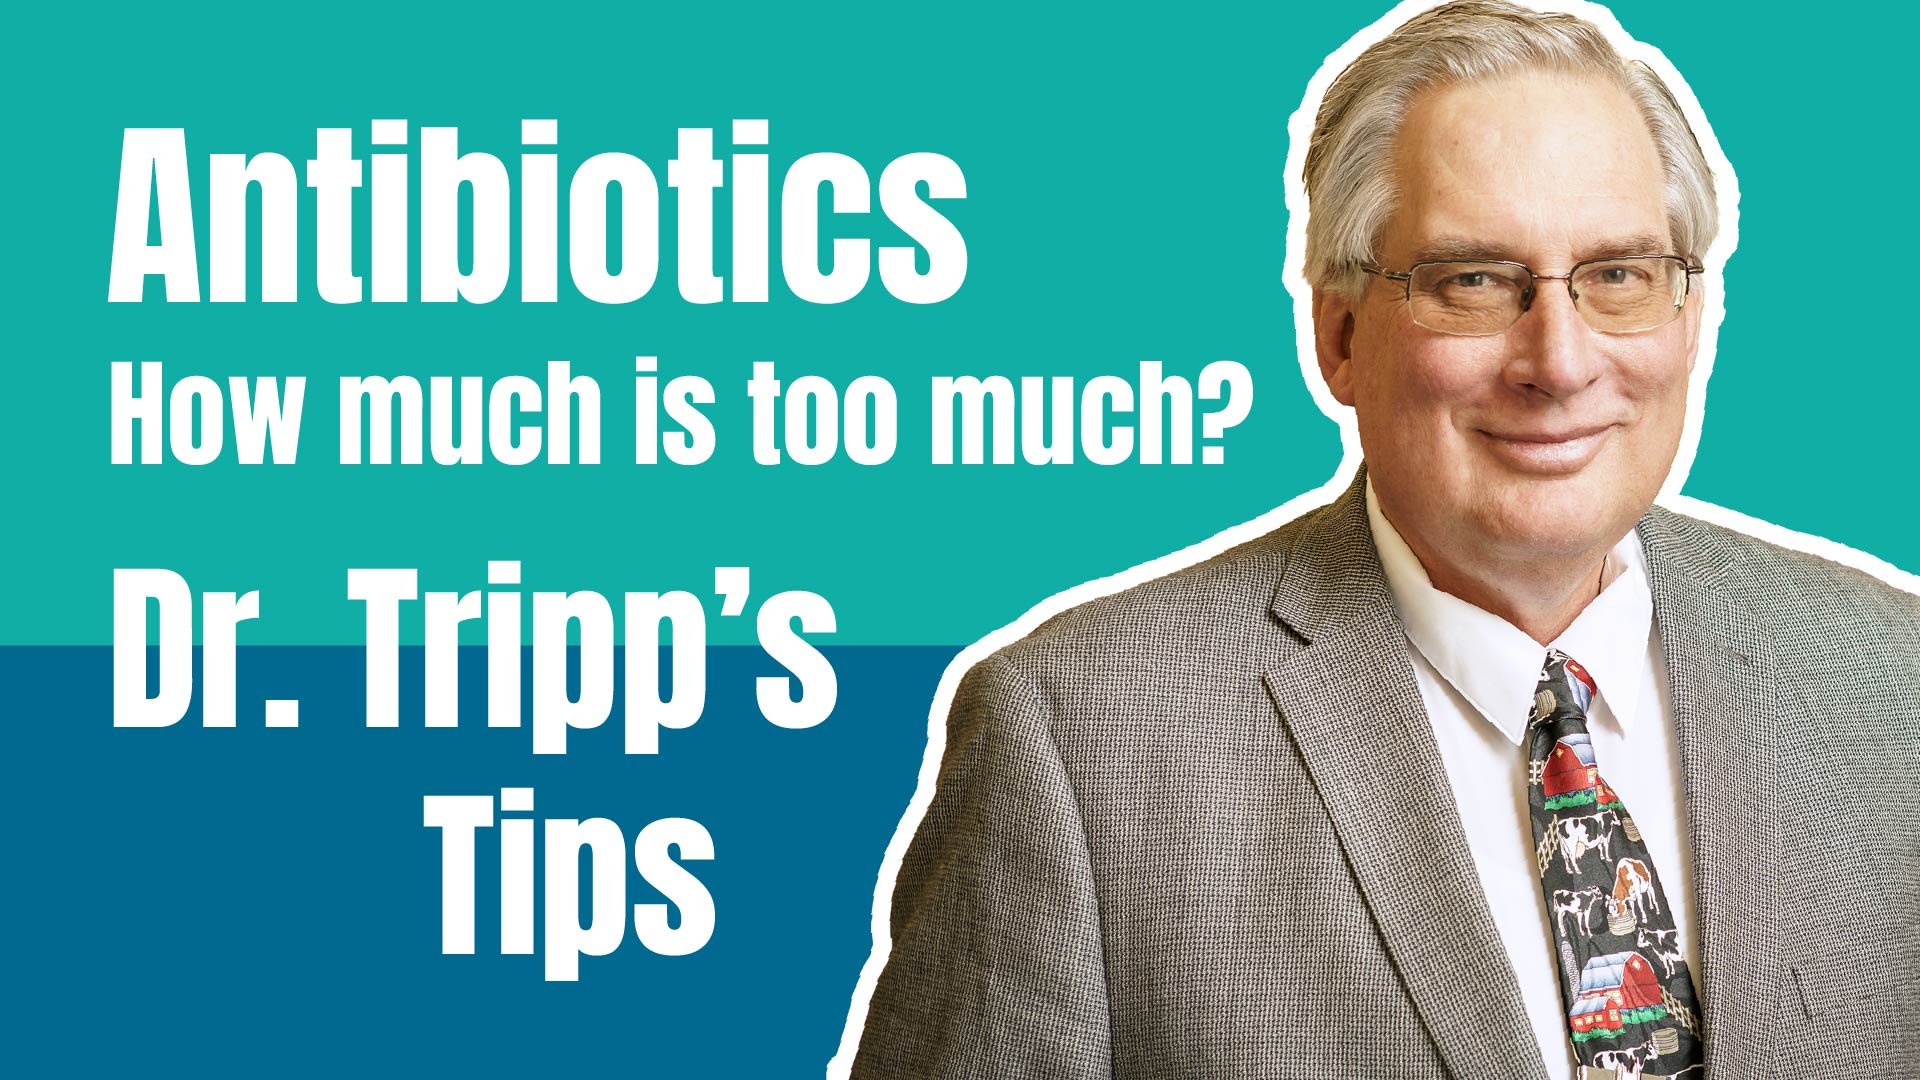 Dr. Tripp on antibiotics - how much is too much?